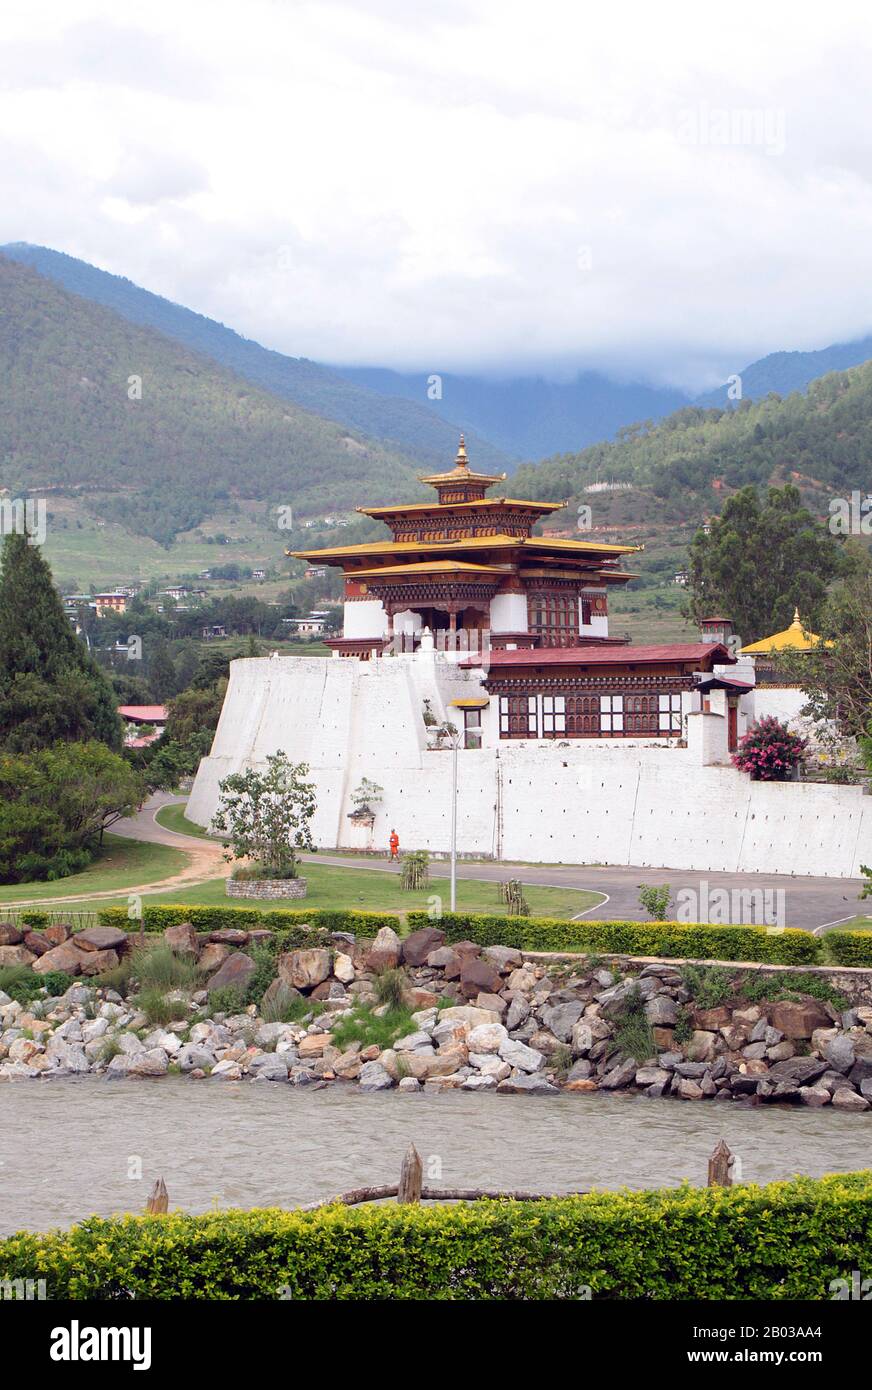 The Punakha Dzong, also known as Pungtang Dewa chhenbi Phodrang ('the palace of great happiness or bliss') was built in 1637 - 1638 by the 1st Zhabdrung Rinpoche and founder of the Bhutanese state, Ngawang Namgyal (1594 - 1651). It is the second largest and second oldest dzong (fortress) in Bhutan, located at the confluence of the Pho Chhu (father) and Mo Chhu (mother) rivers in the Punakha-Wangdue valley.  Punakha Dzong is the administrative centre of Punakha District, and once acted as the administrative centre and the seat of Bhutan's government until 1855, when the capital was moved to Thi Stock Photo